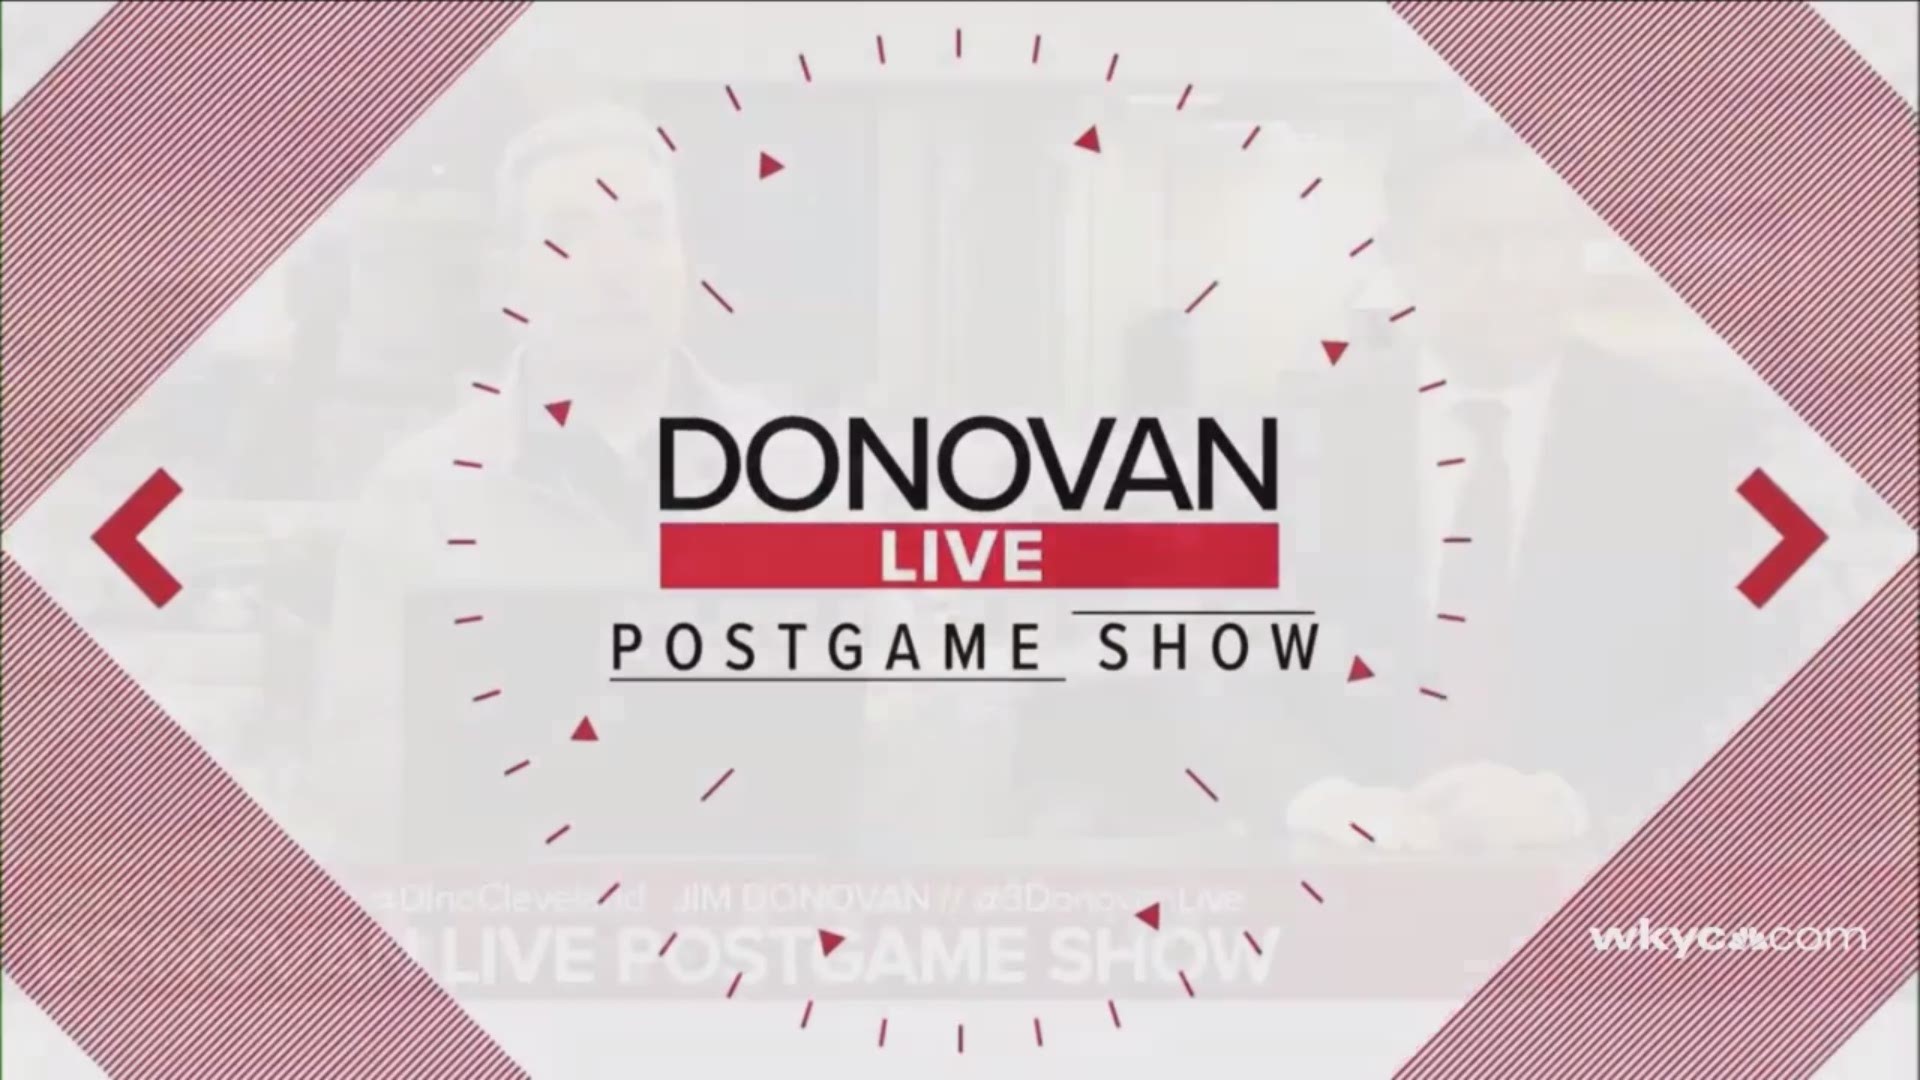 Looking back at Bill Belichick's legacy with the Cleveland Browns: The Donovan Live Postgame Show